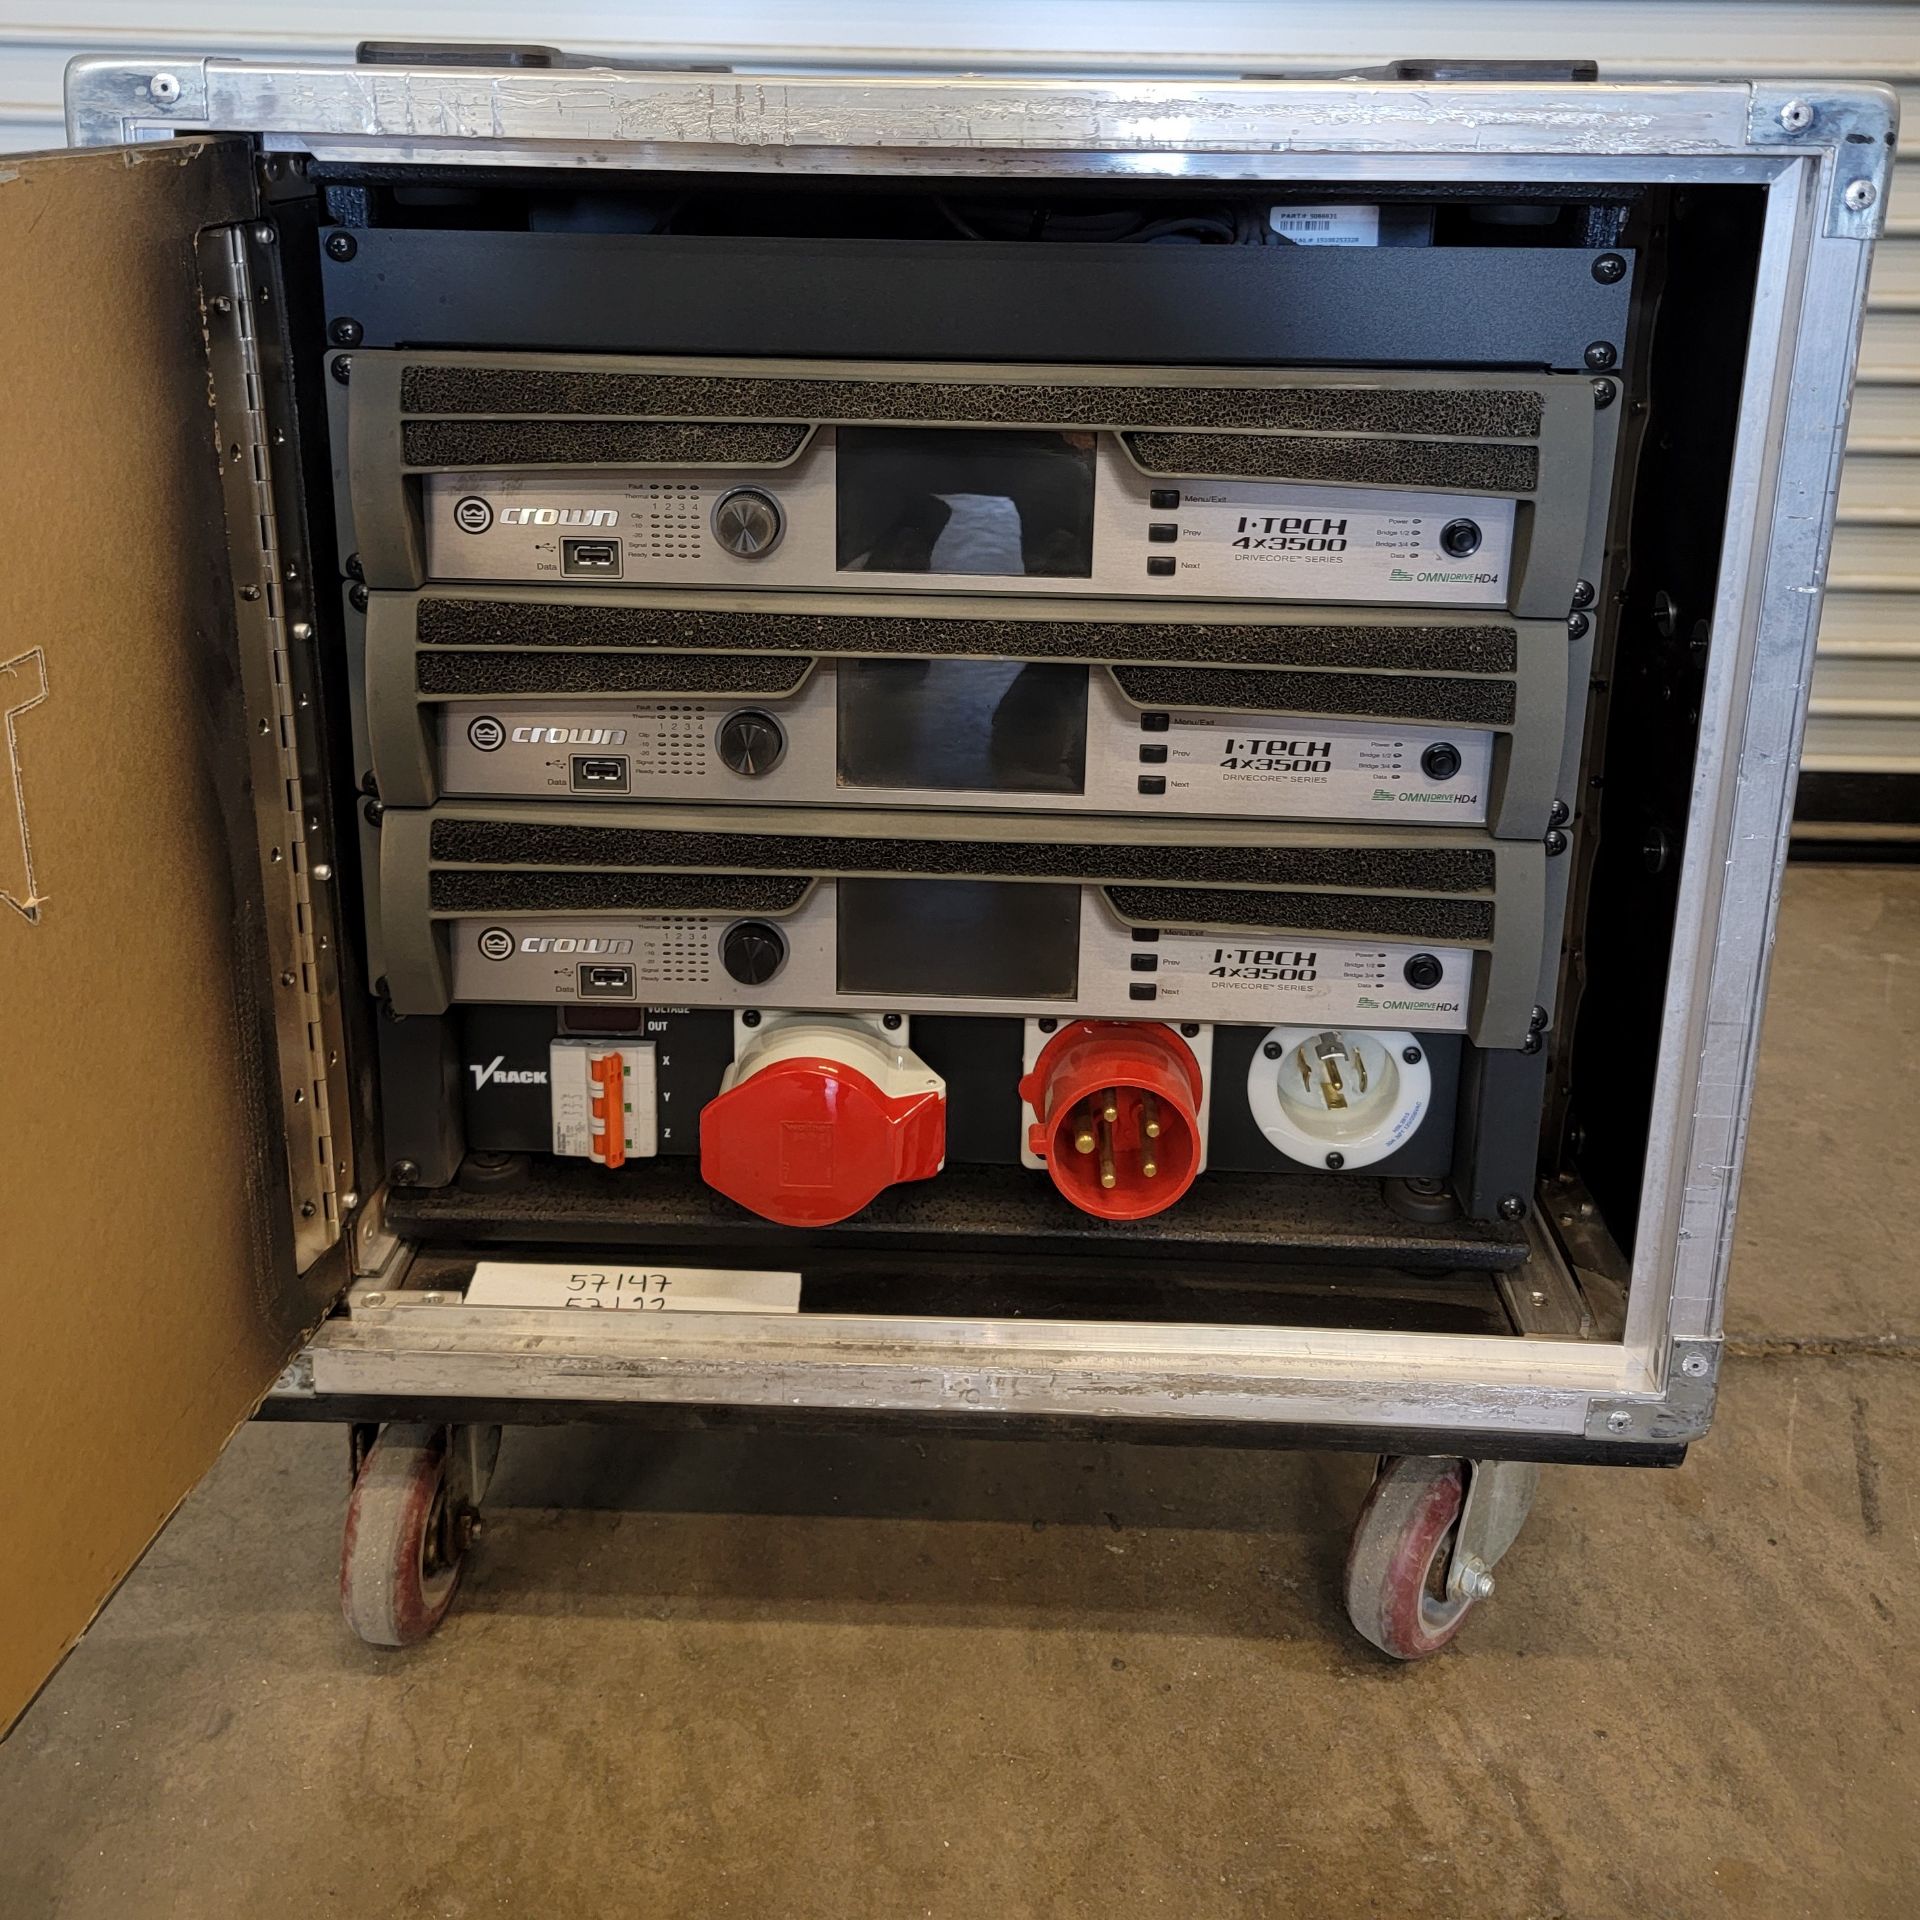 Lot of entire package of equipment